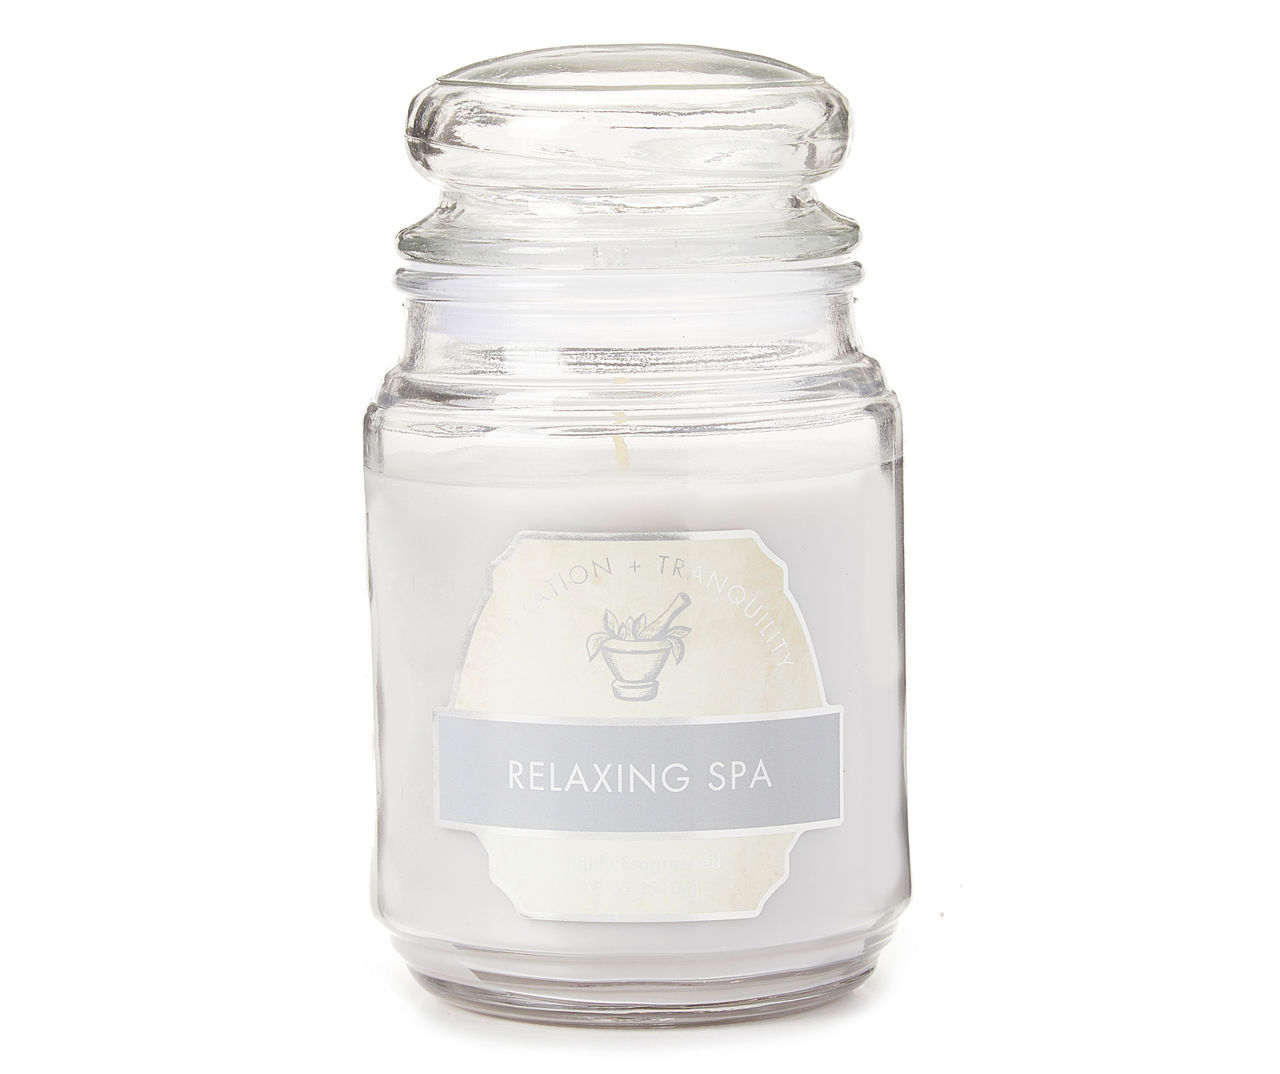 Relaxing Spa Jar Candle, 18 Oz.